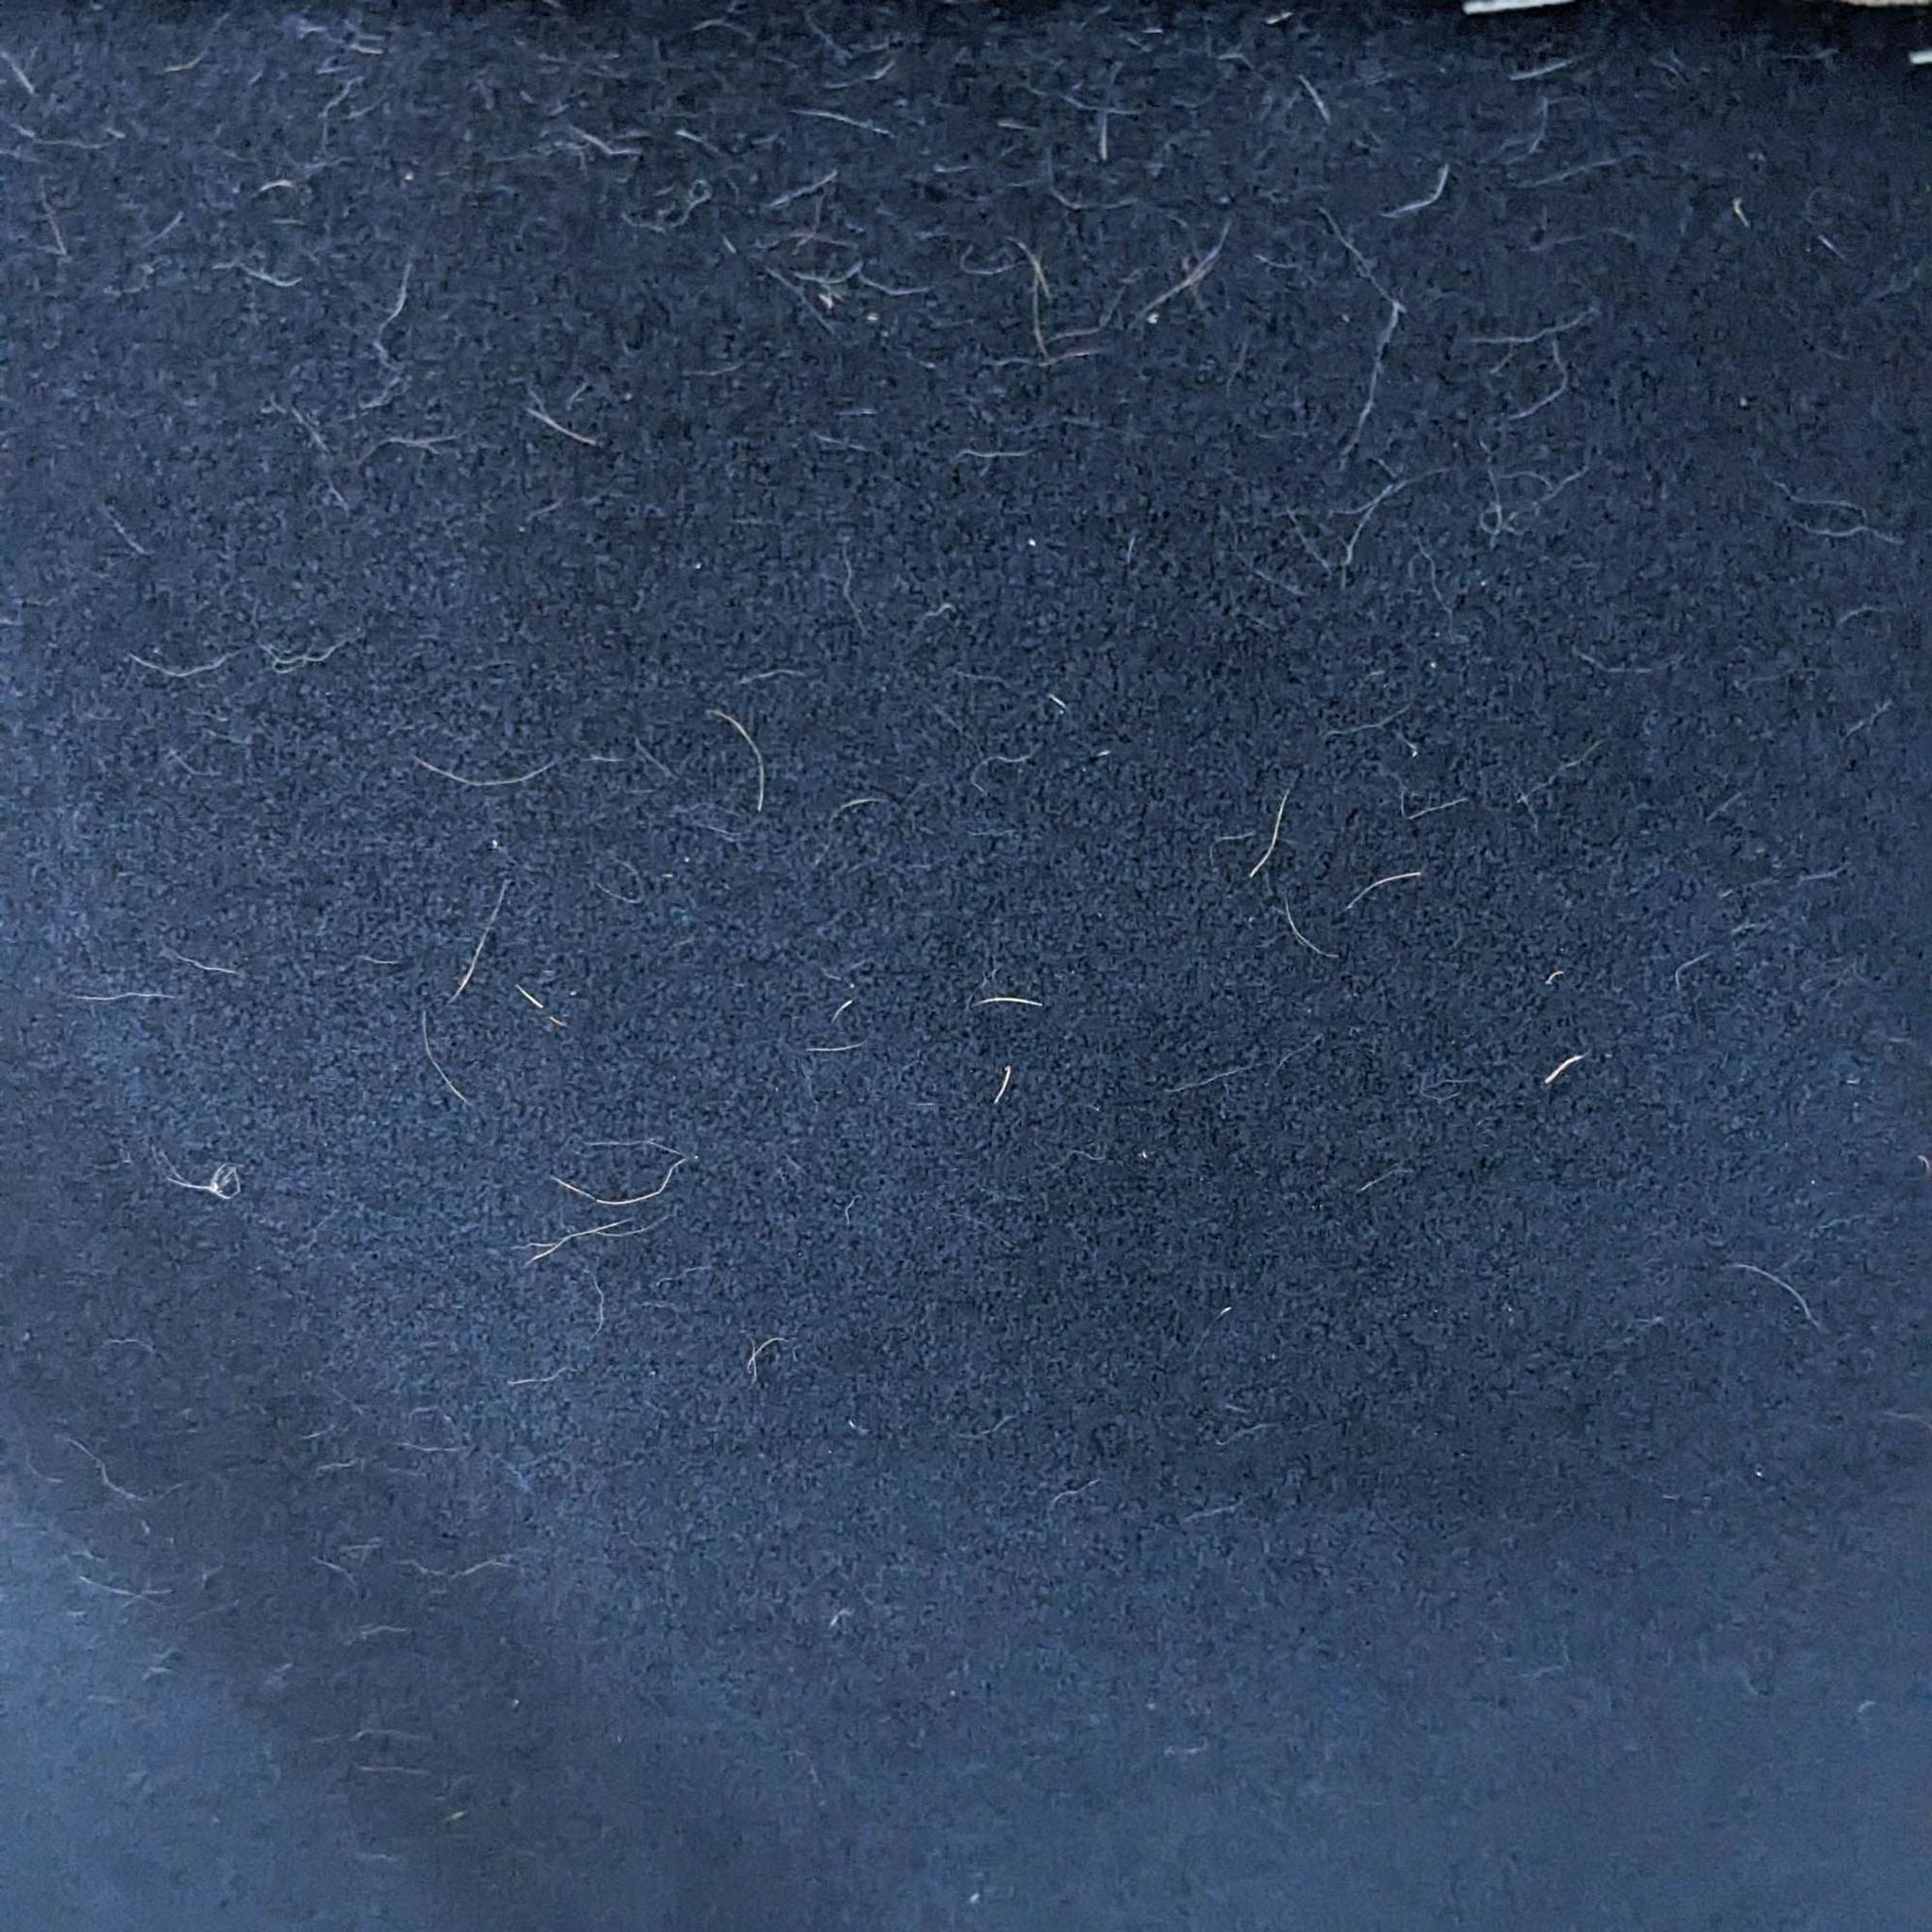 Close-up texture of microfiber upholstery, possibly from a Sharelle Elite Collection dining chair.